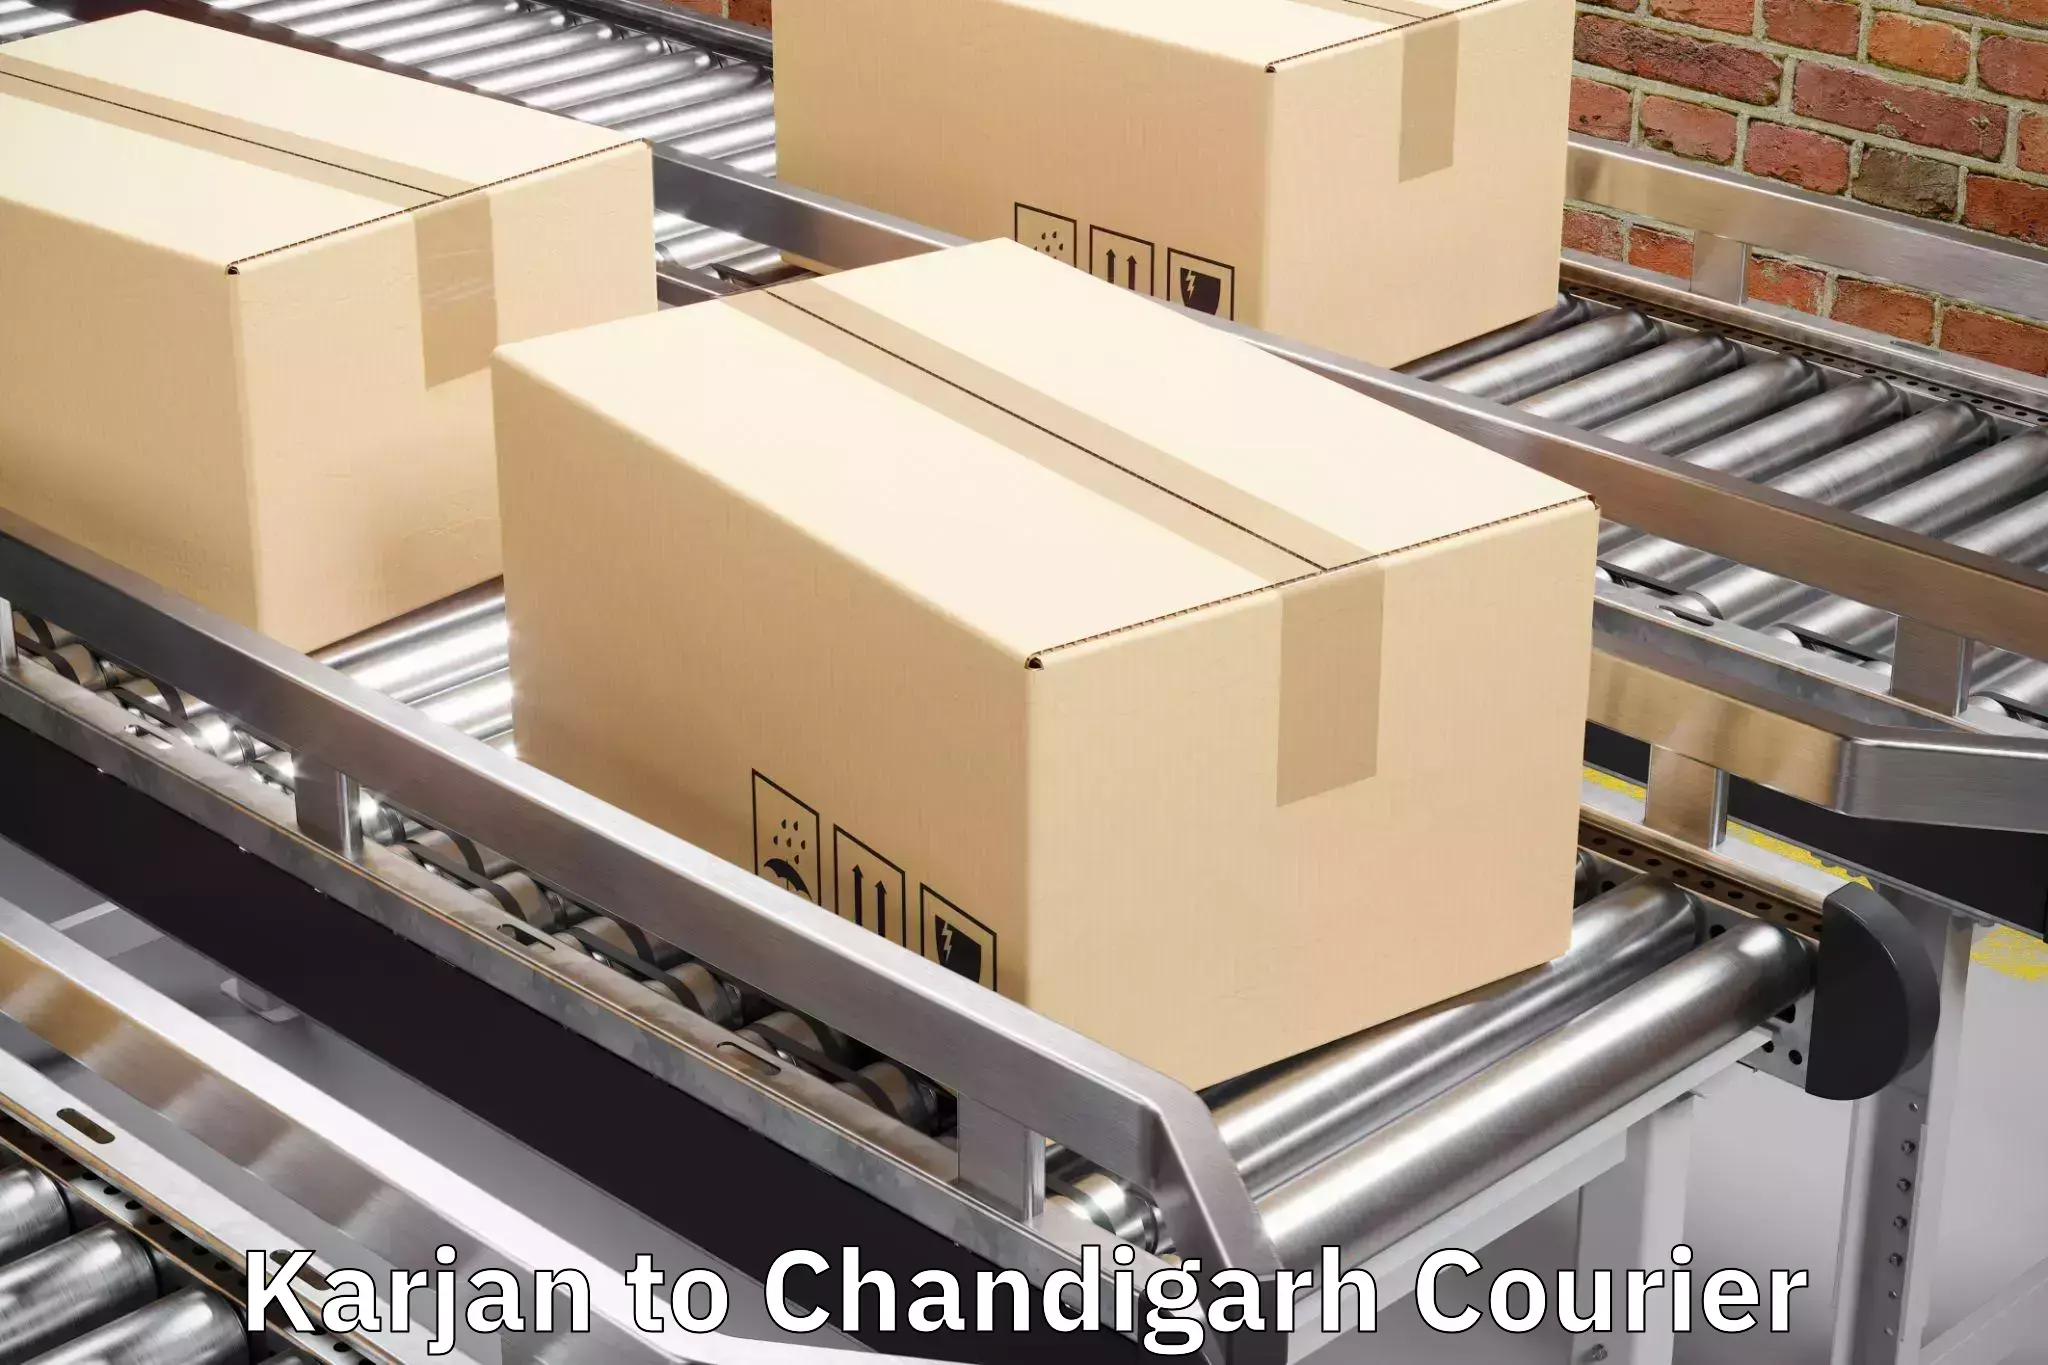 Luggage delivery news Karjan to Chandigarh